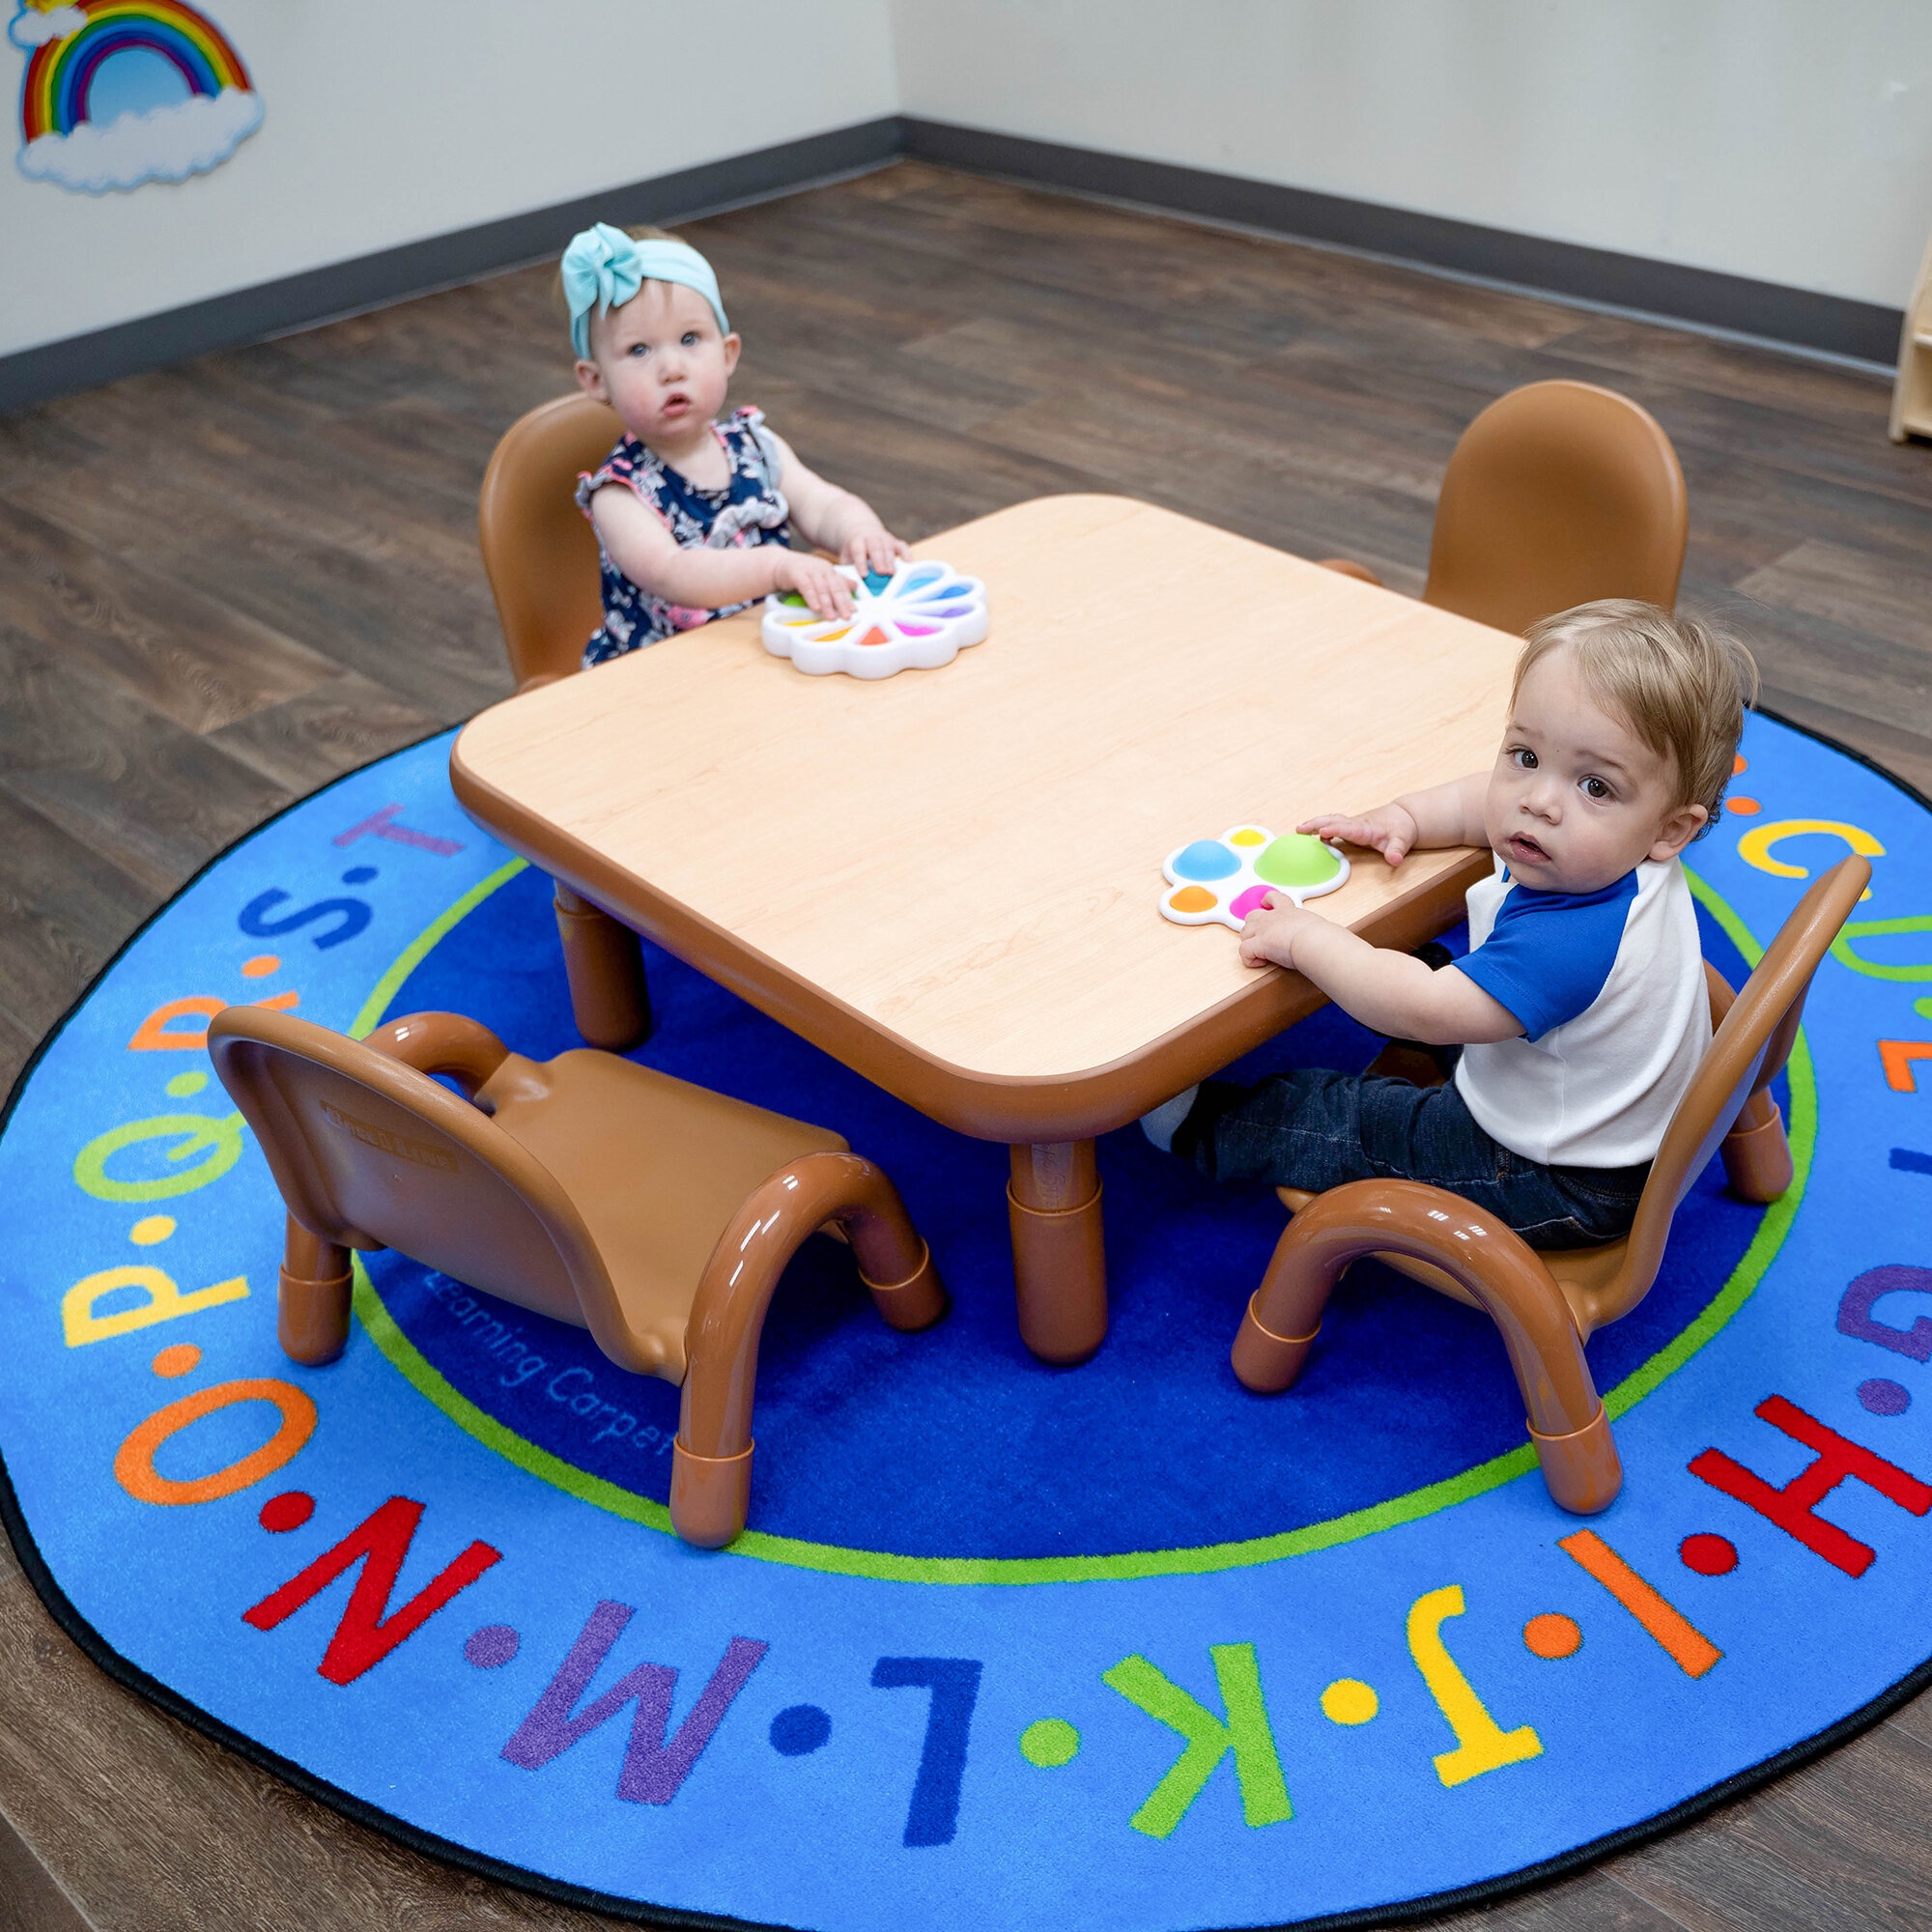 https://visualhunt.com/photos/23/baseline-kids-5-piece-square-play-activity-table-and-chair-set-1.jpg